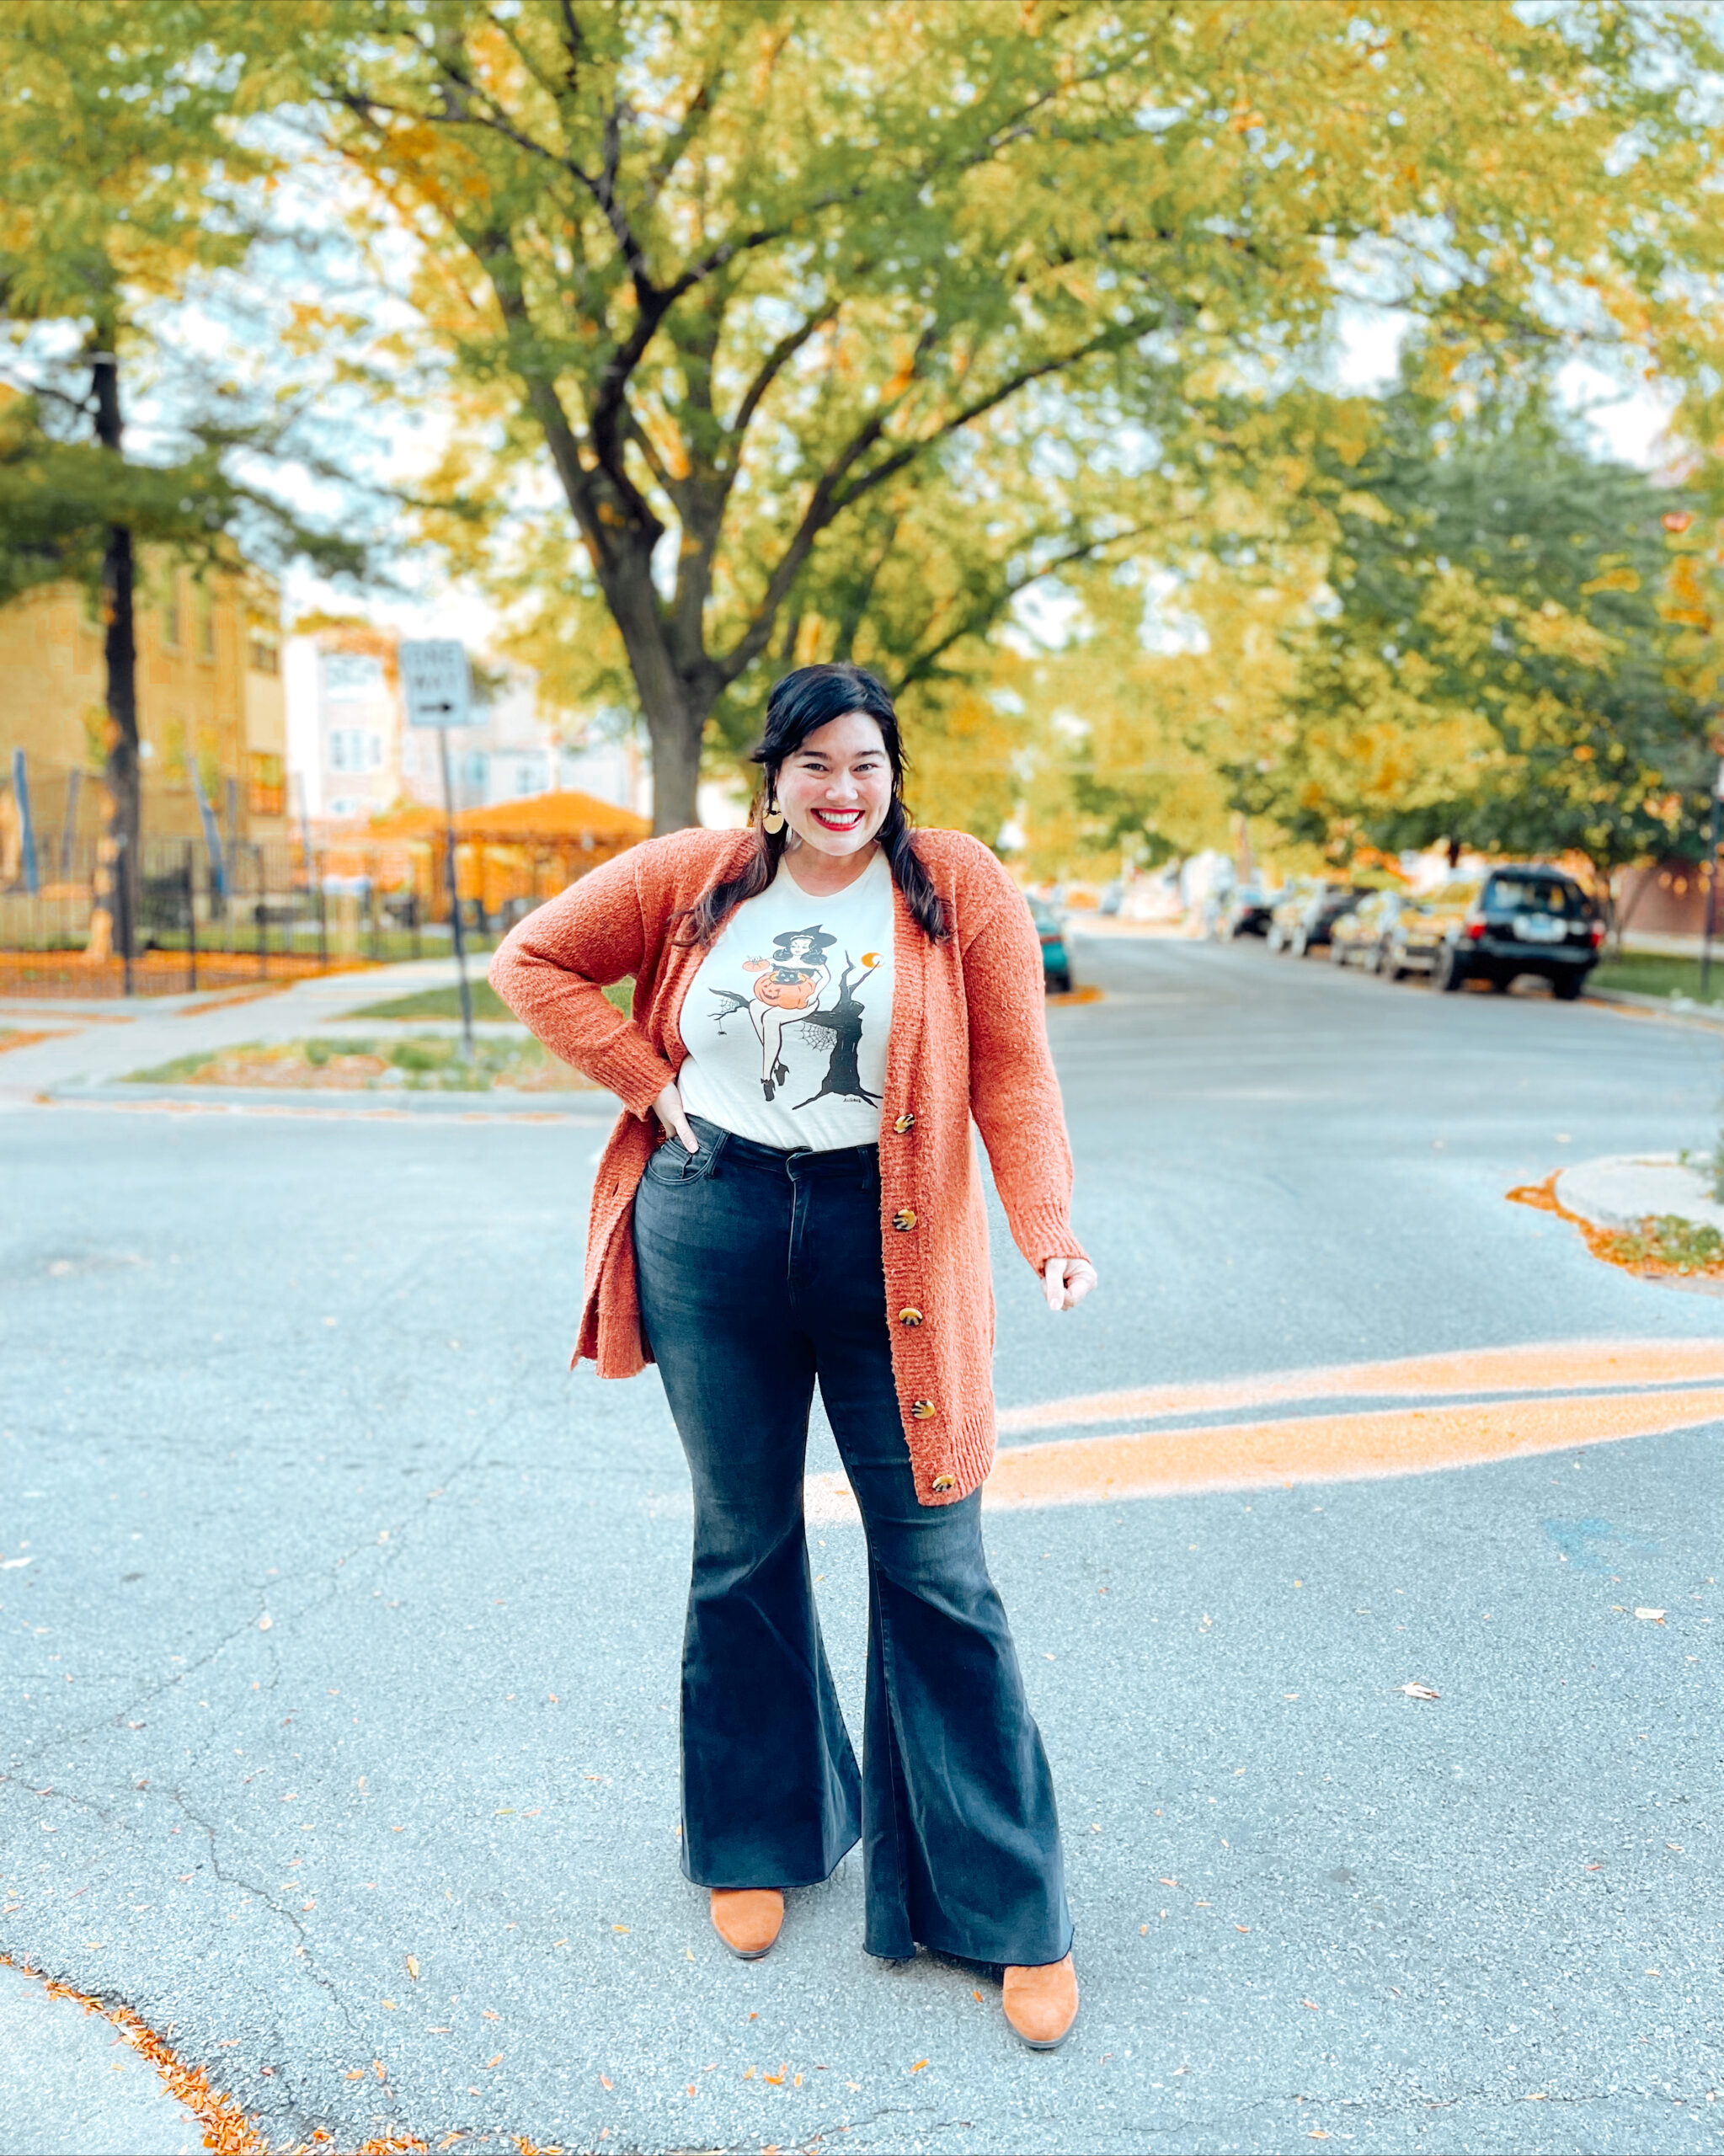 https://stylepluscurves.com/wp-content/uploads/2022/10/Halloween-Tee-Plus-Size-Bell-Bottoms-1-scaled.jpg